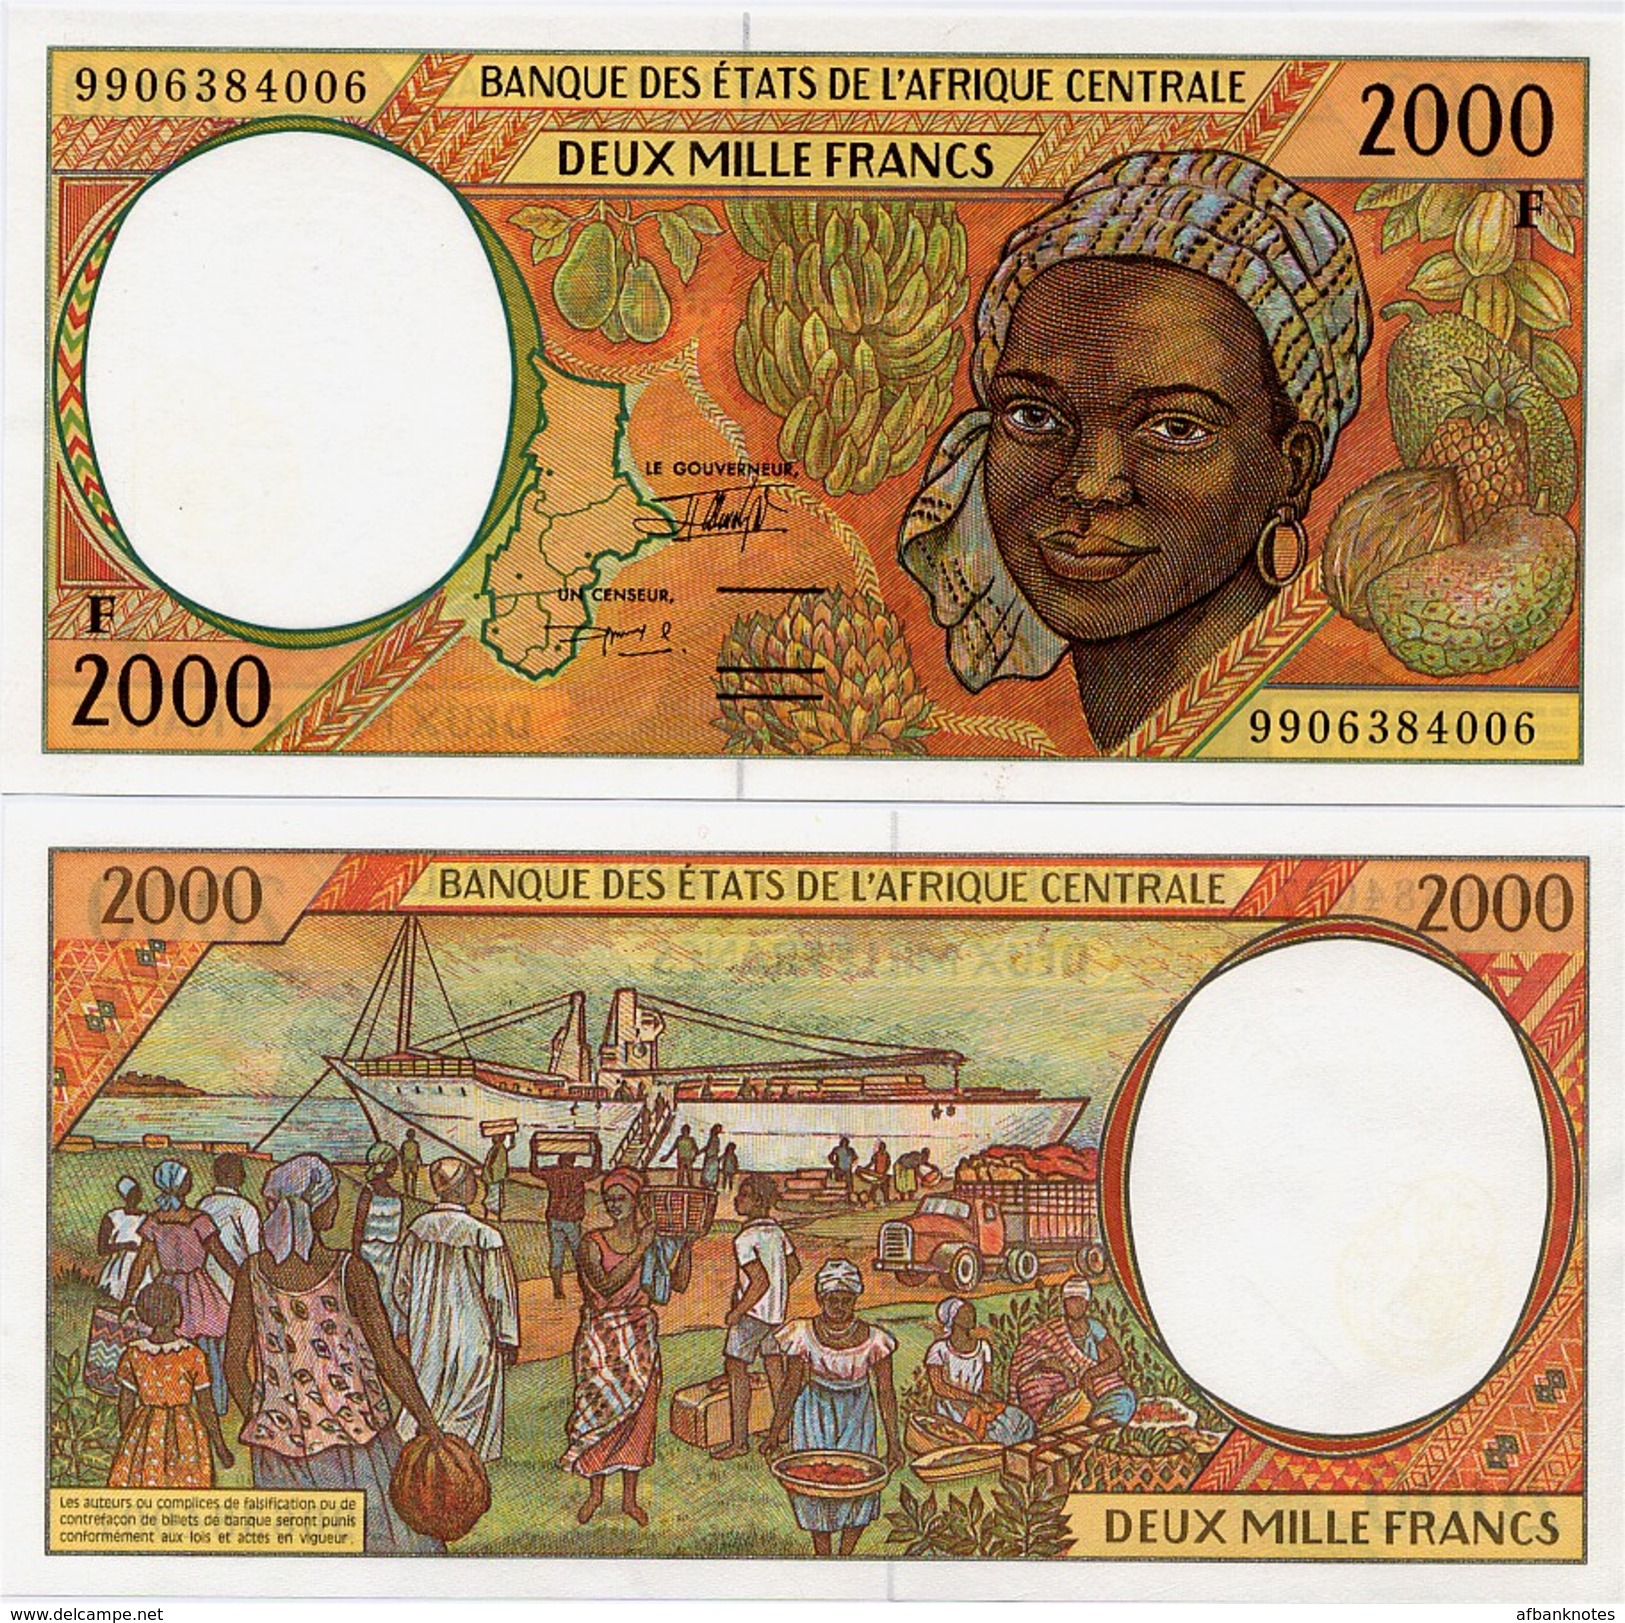 CENTRAL AFRICAN STATES   F: C.Afr.Rep.    2000 Francs     P-303Ff       (19)99     UNC - Stati Centrafricani